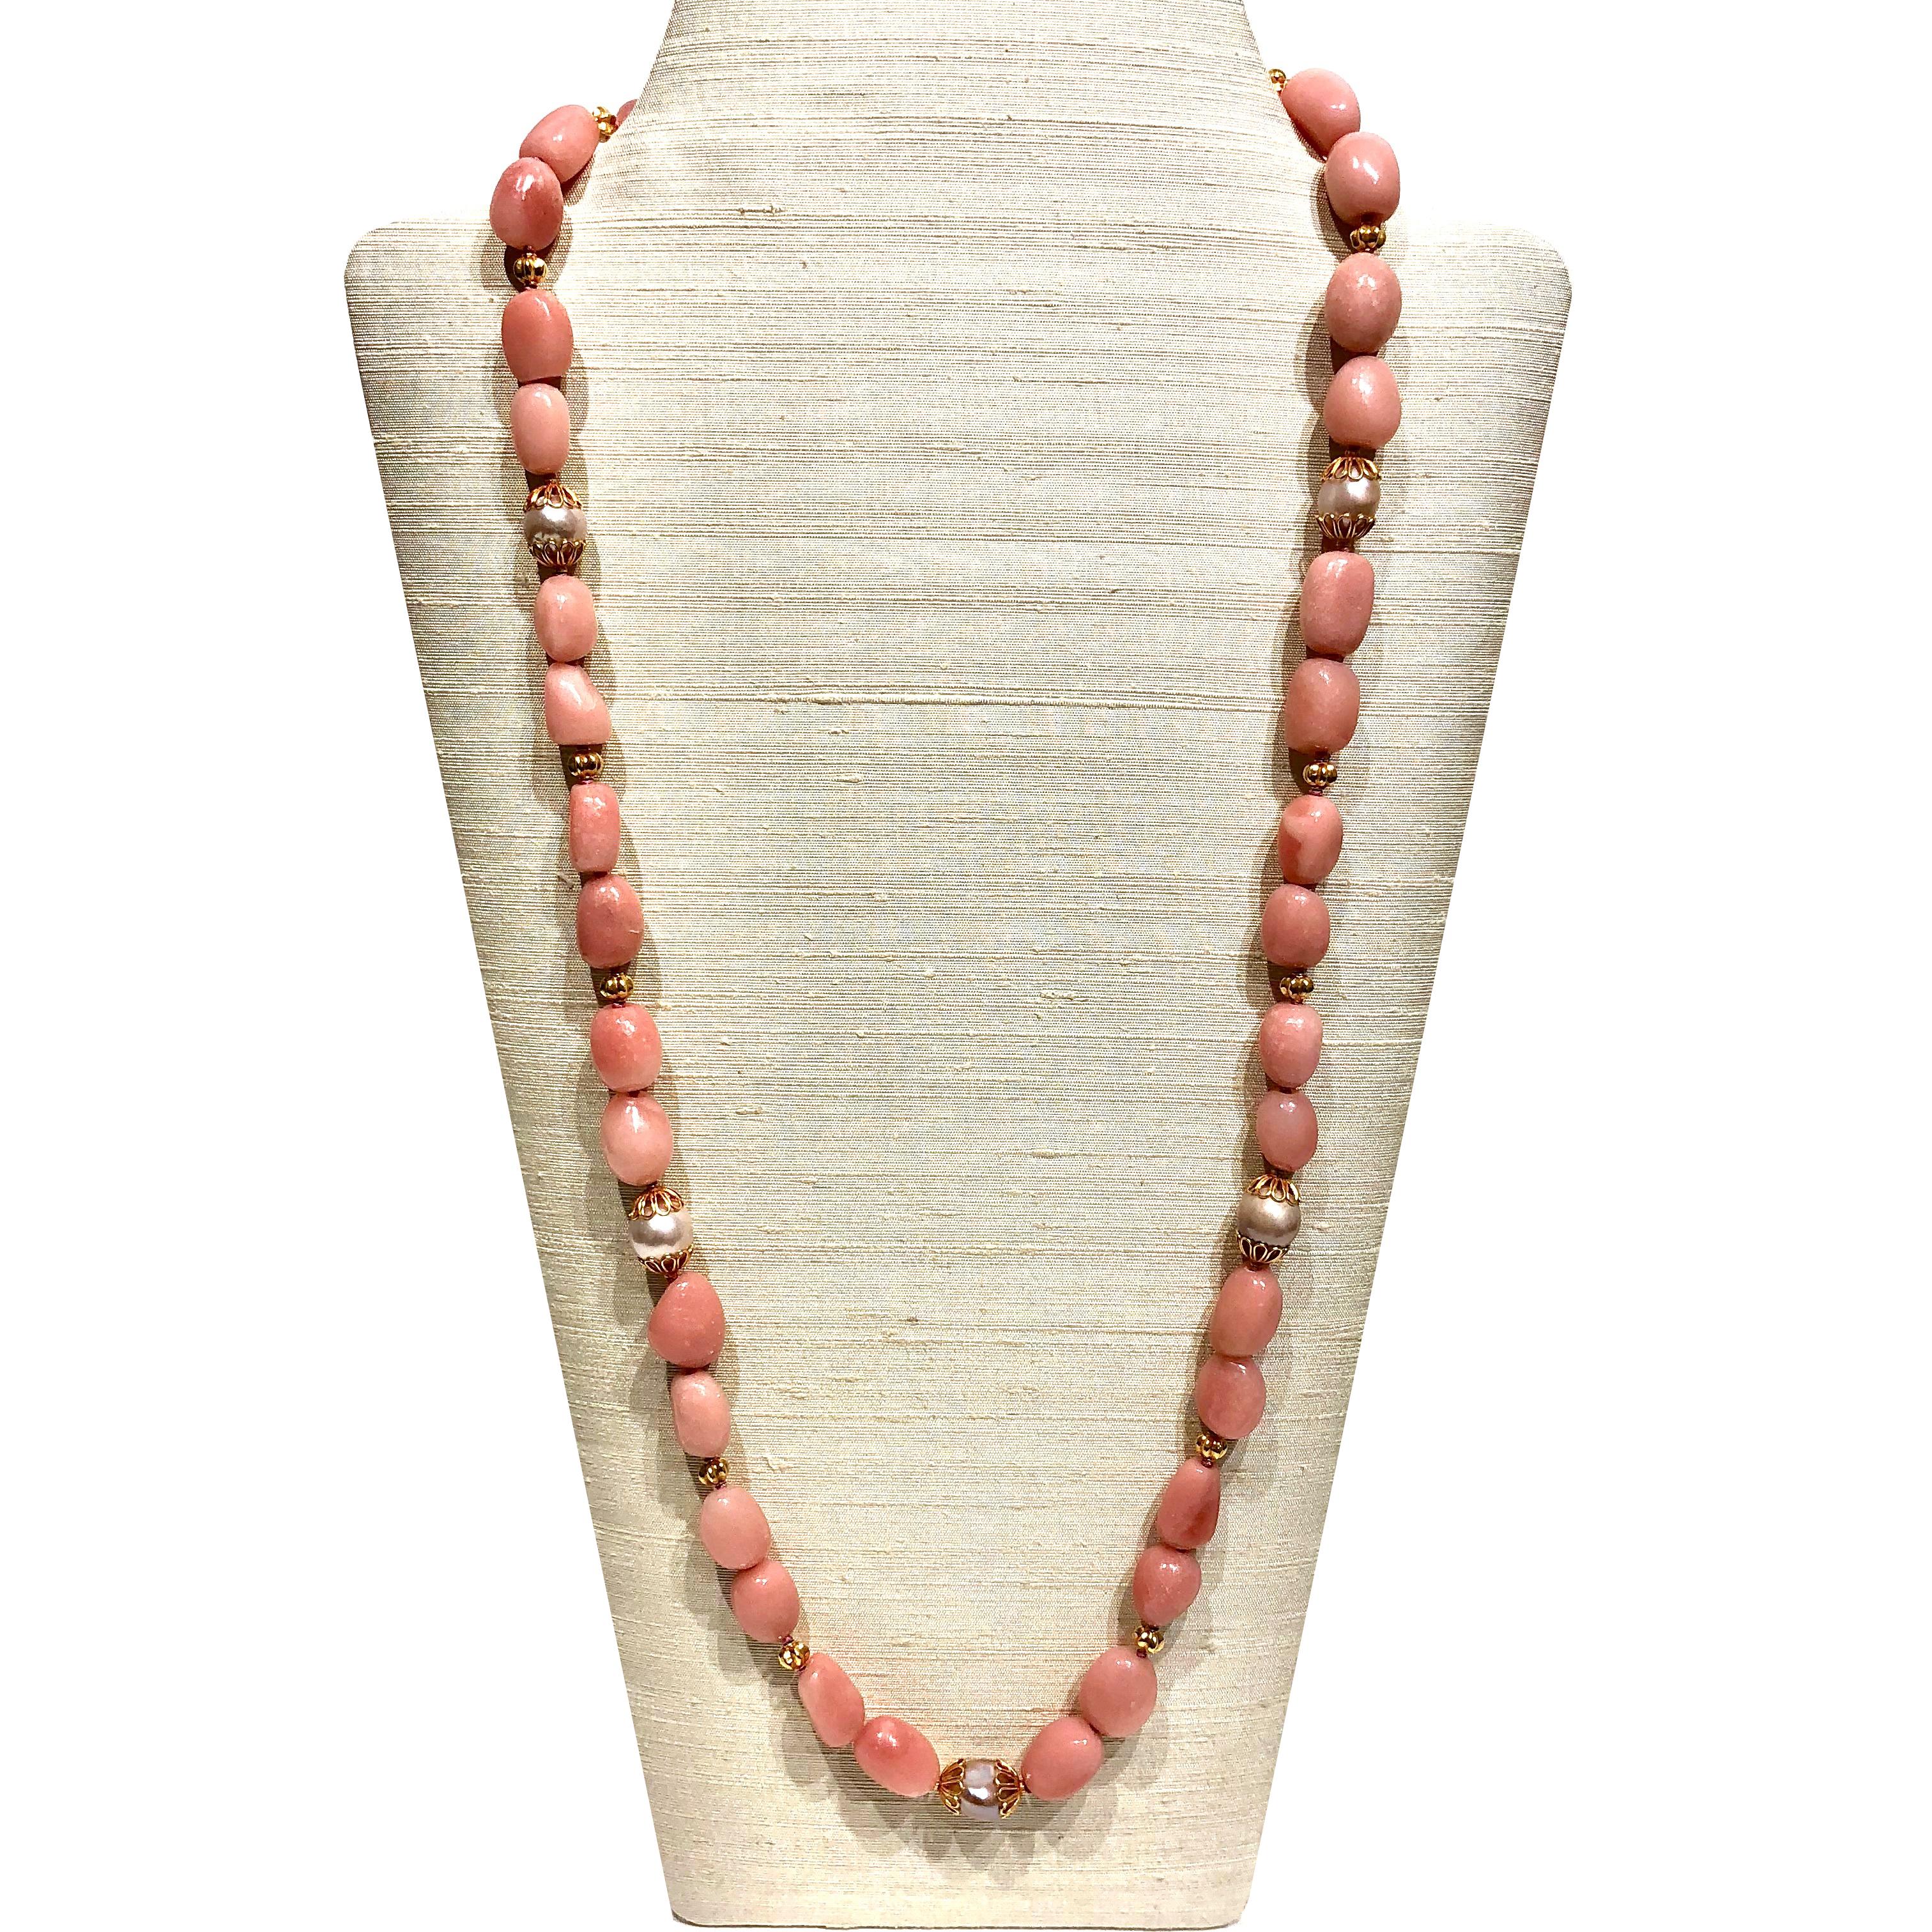 An elegant 33.5 in (85 cm) long necklace with beautiful pink aragonite & pink-toned freshwater pearls and 18k gold beads & clasp. 

Designed by AMANDA CLARK for Altfield, our collection focuses on natures most lovely materials such as pearls, amber,